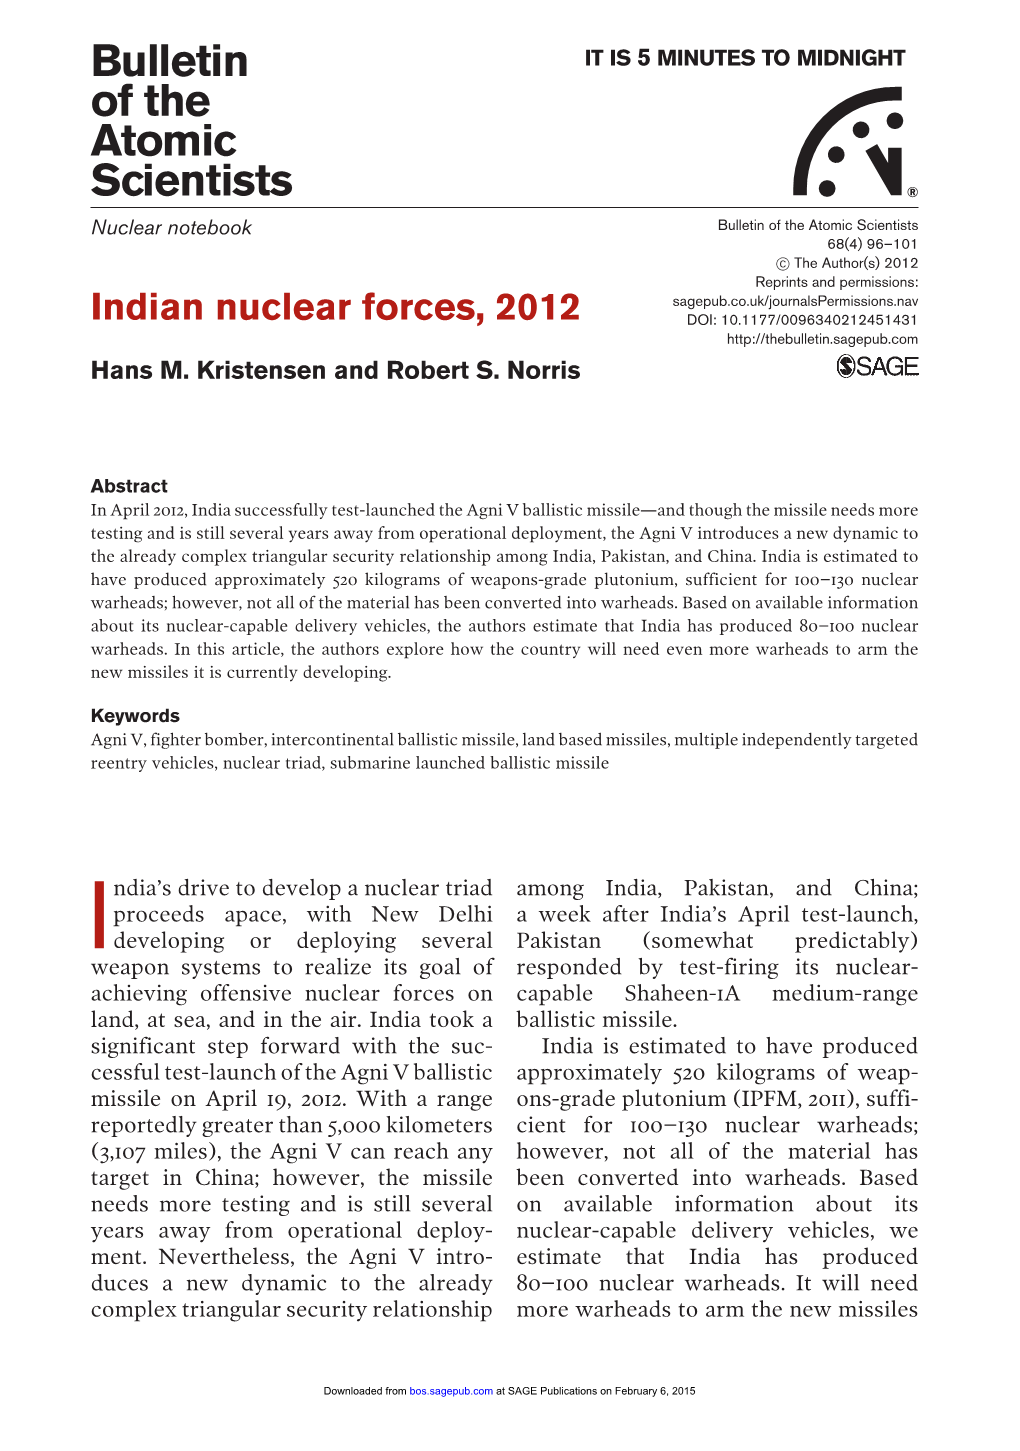 Indian Nuclear Forces 2012